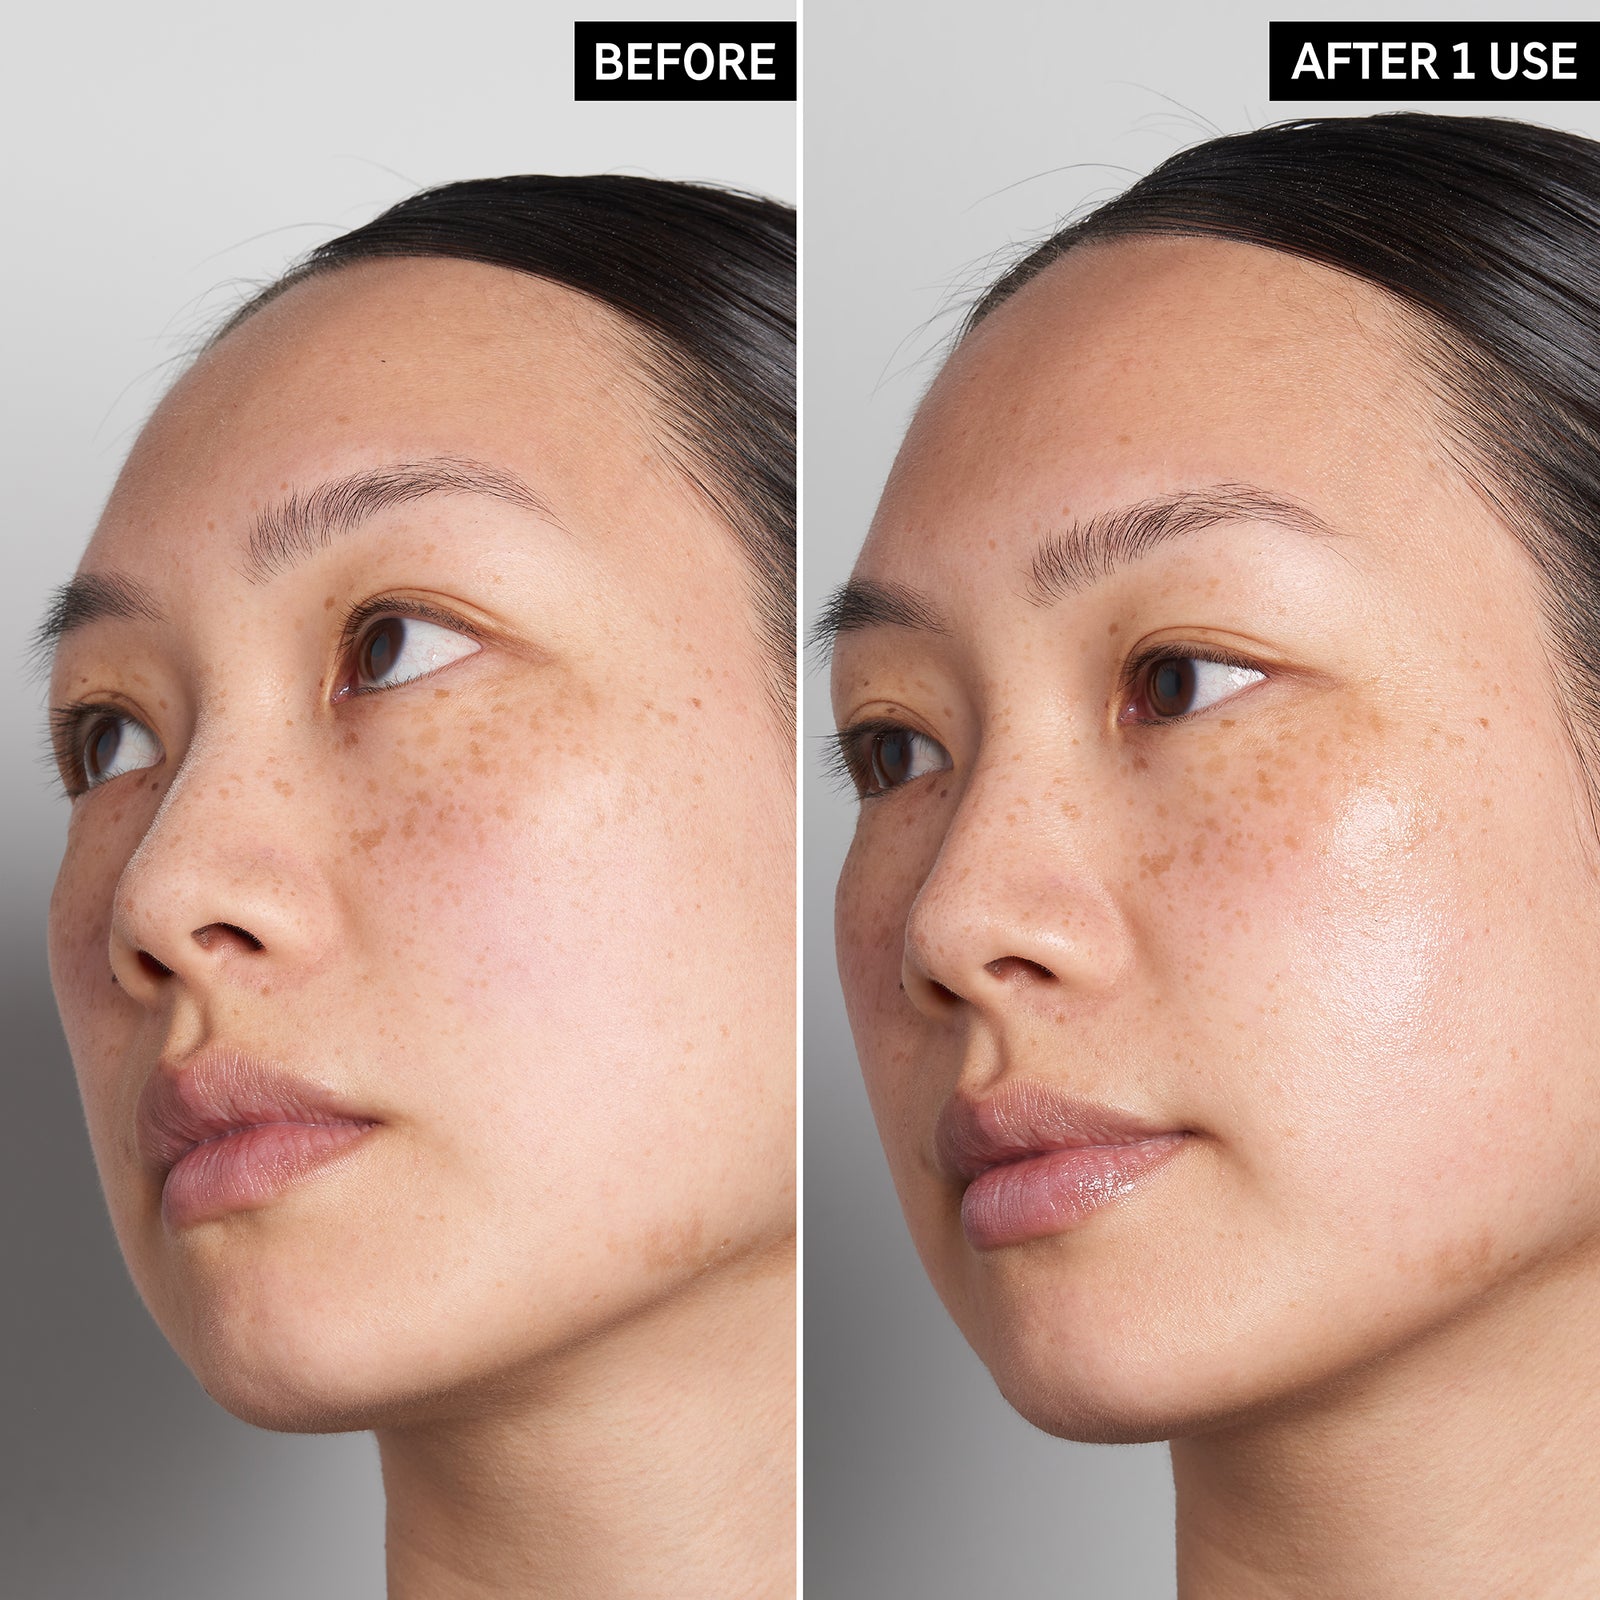 Before and after 1 use of HA Serum, showing plumper skin